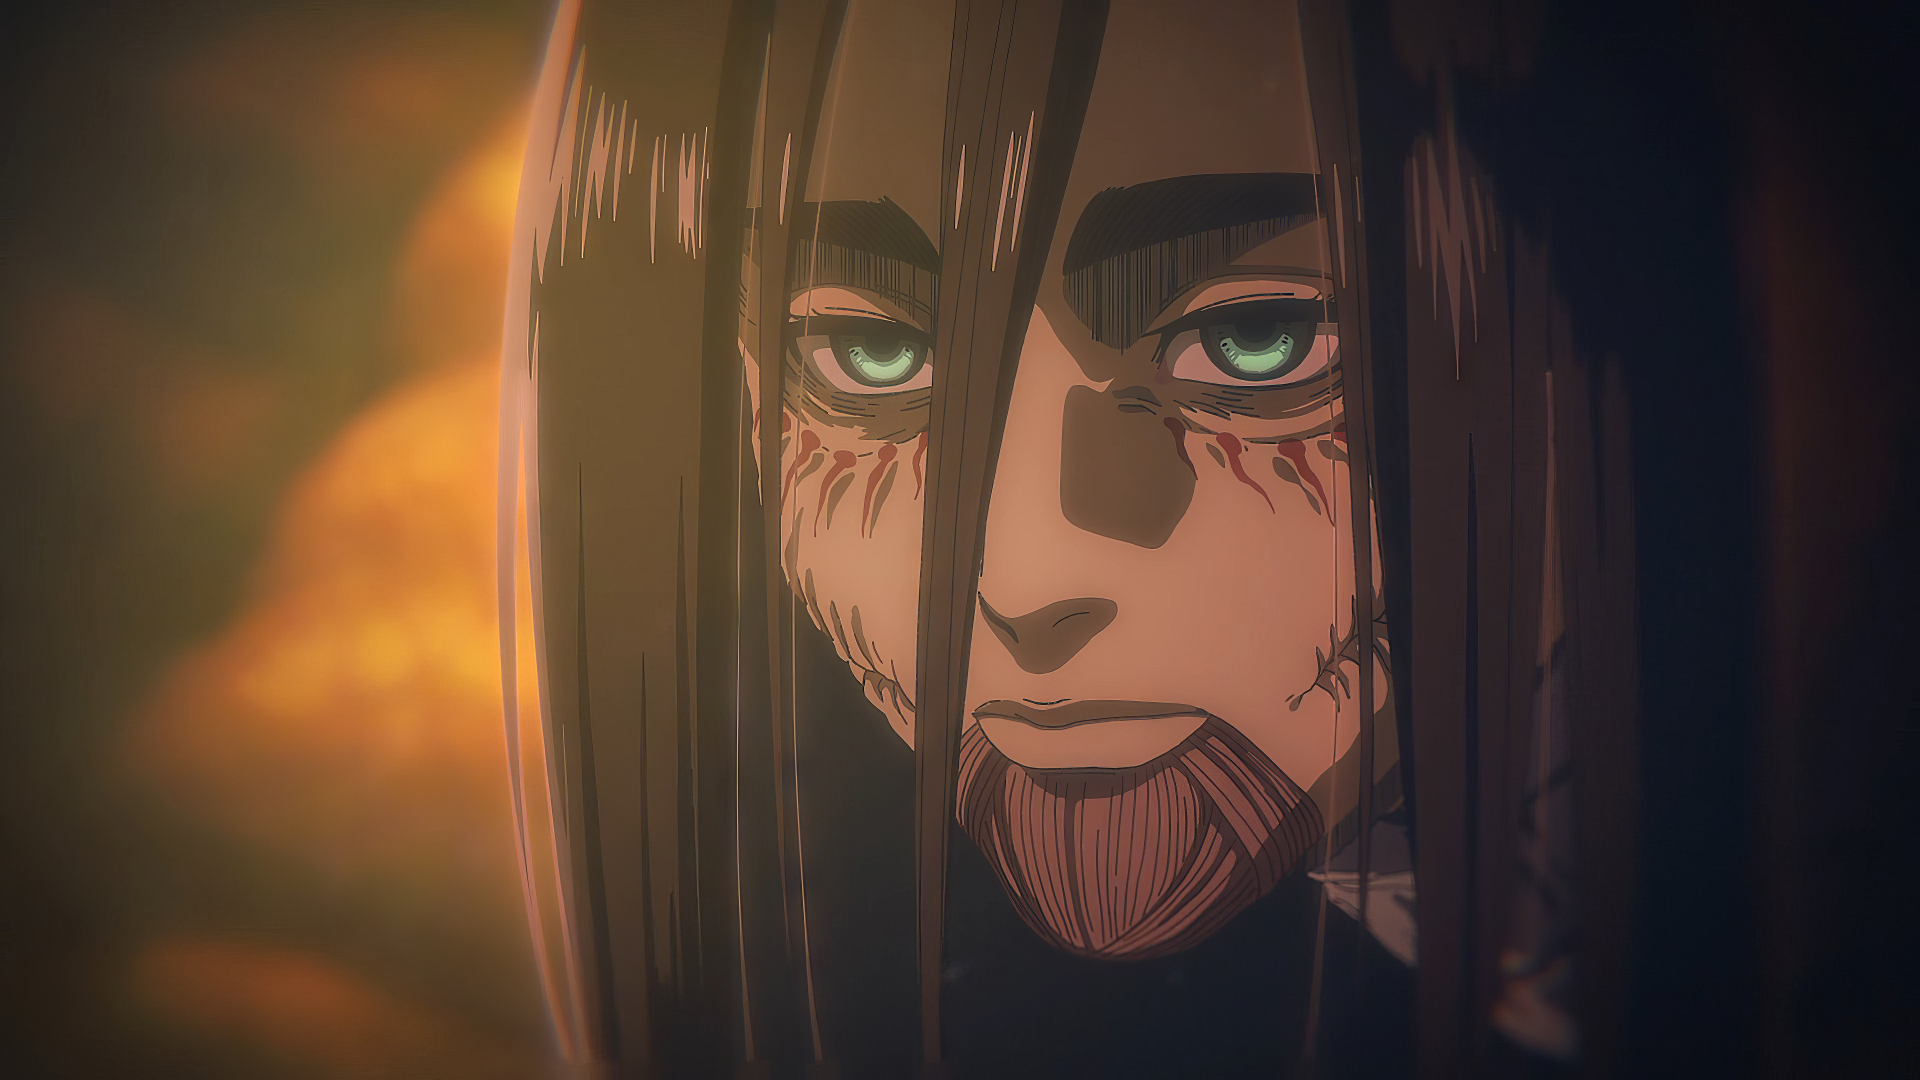 400+] Attack On Titan Wallpapers